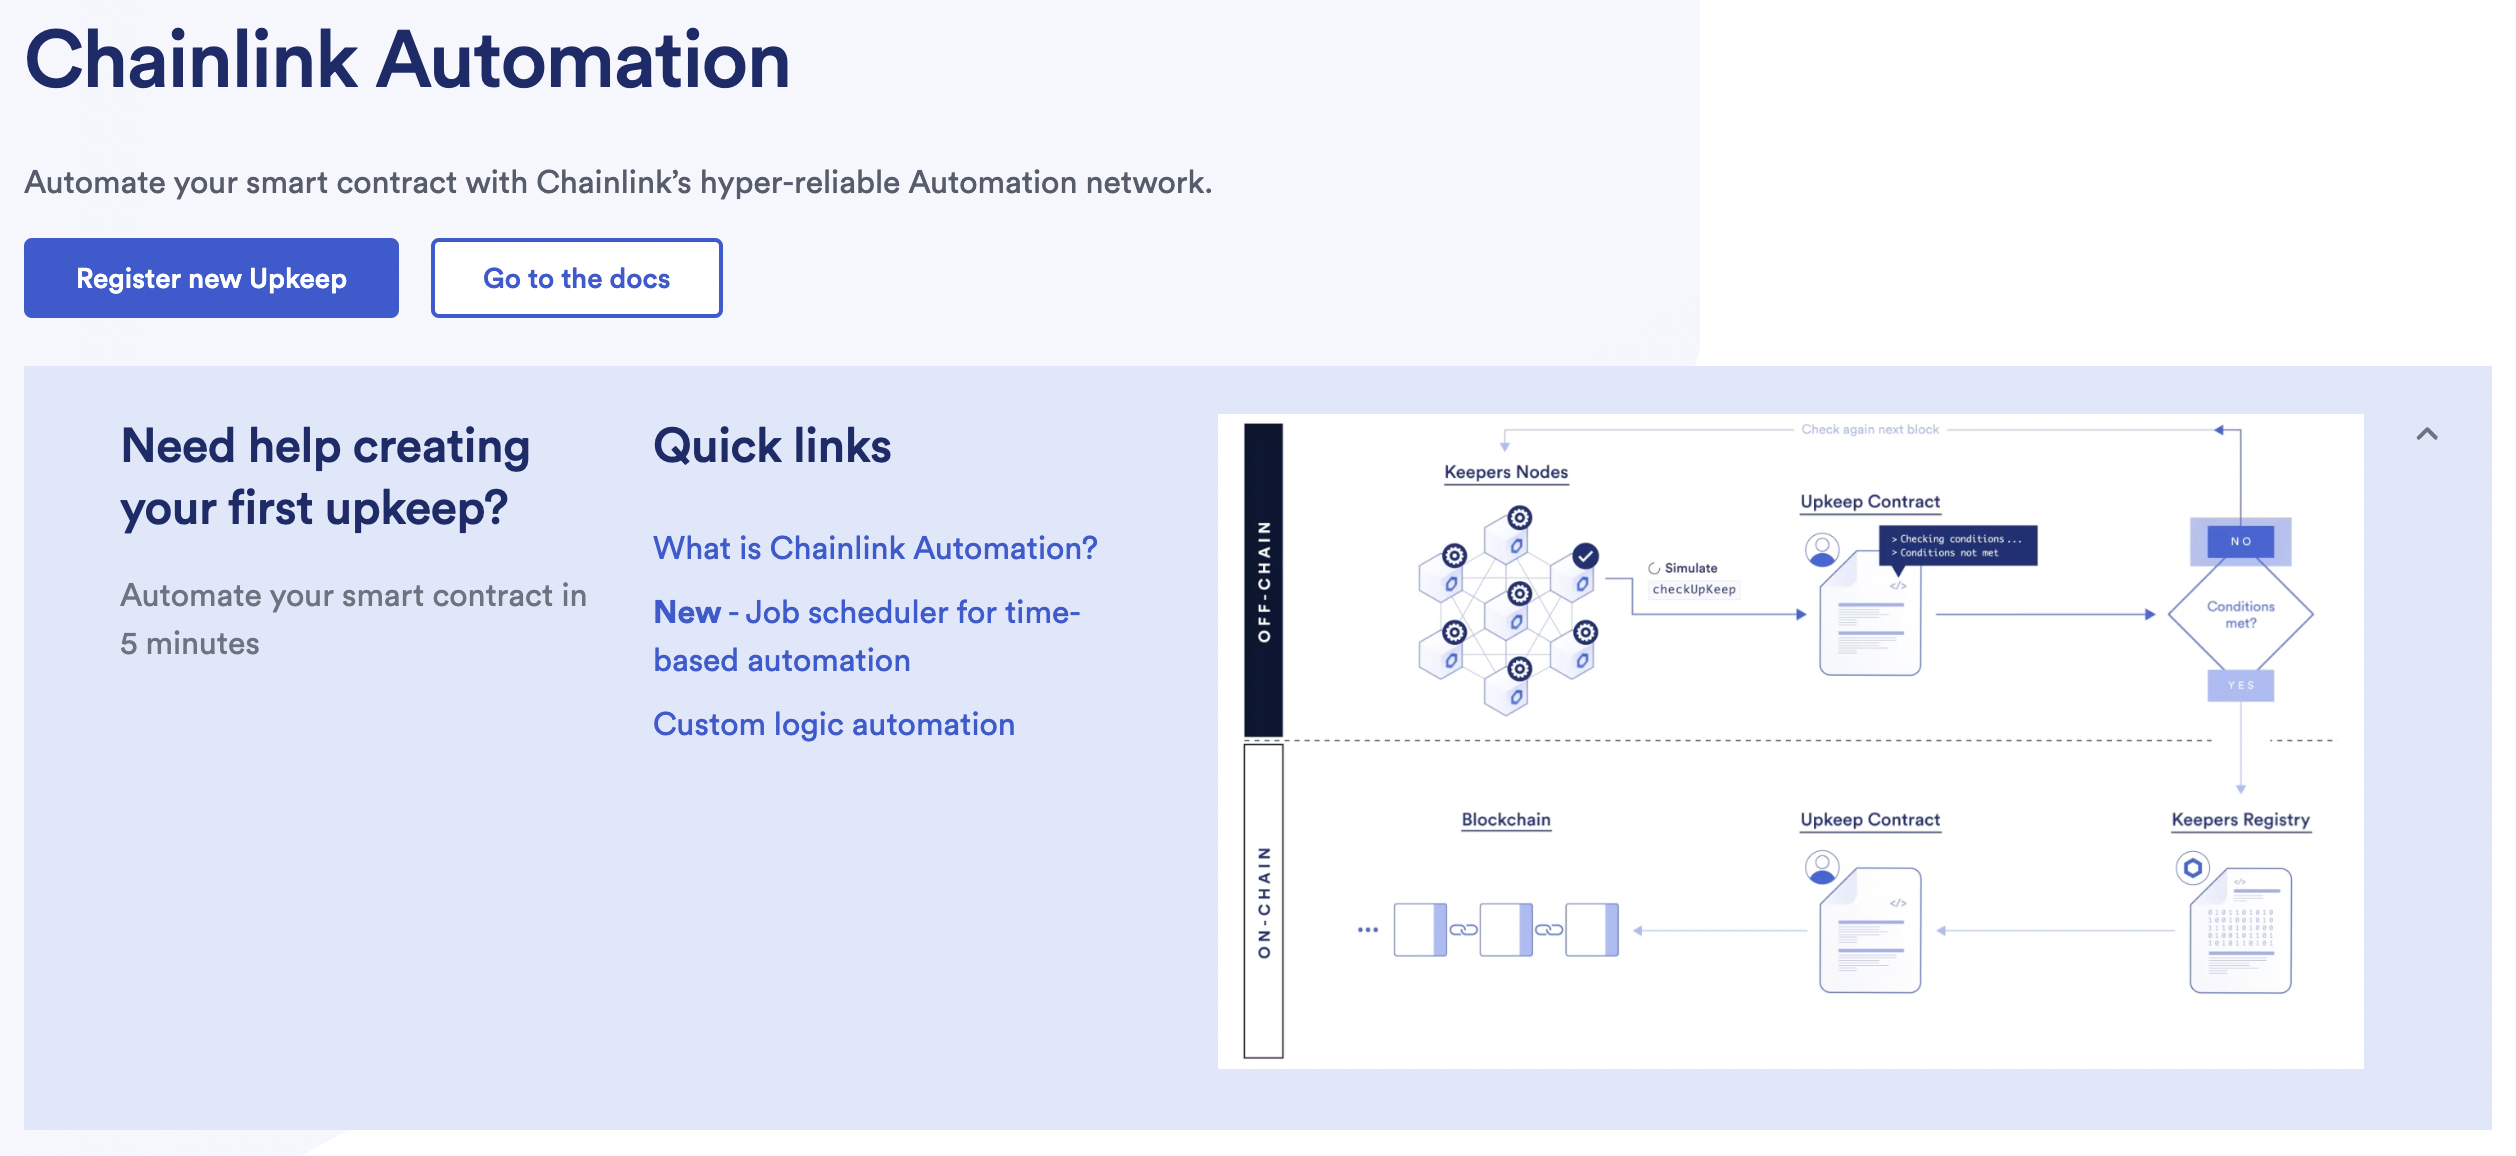 Chainlink Automation App